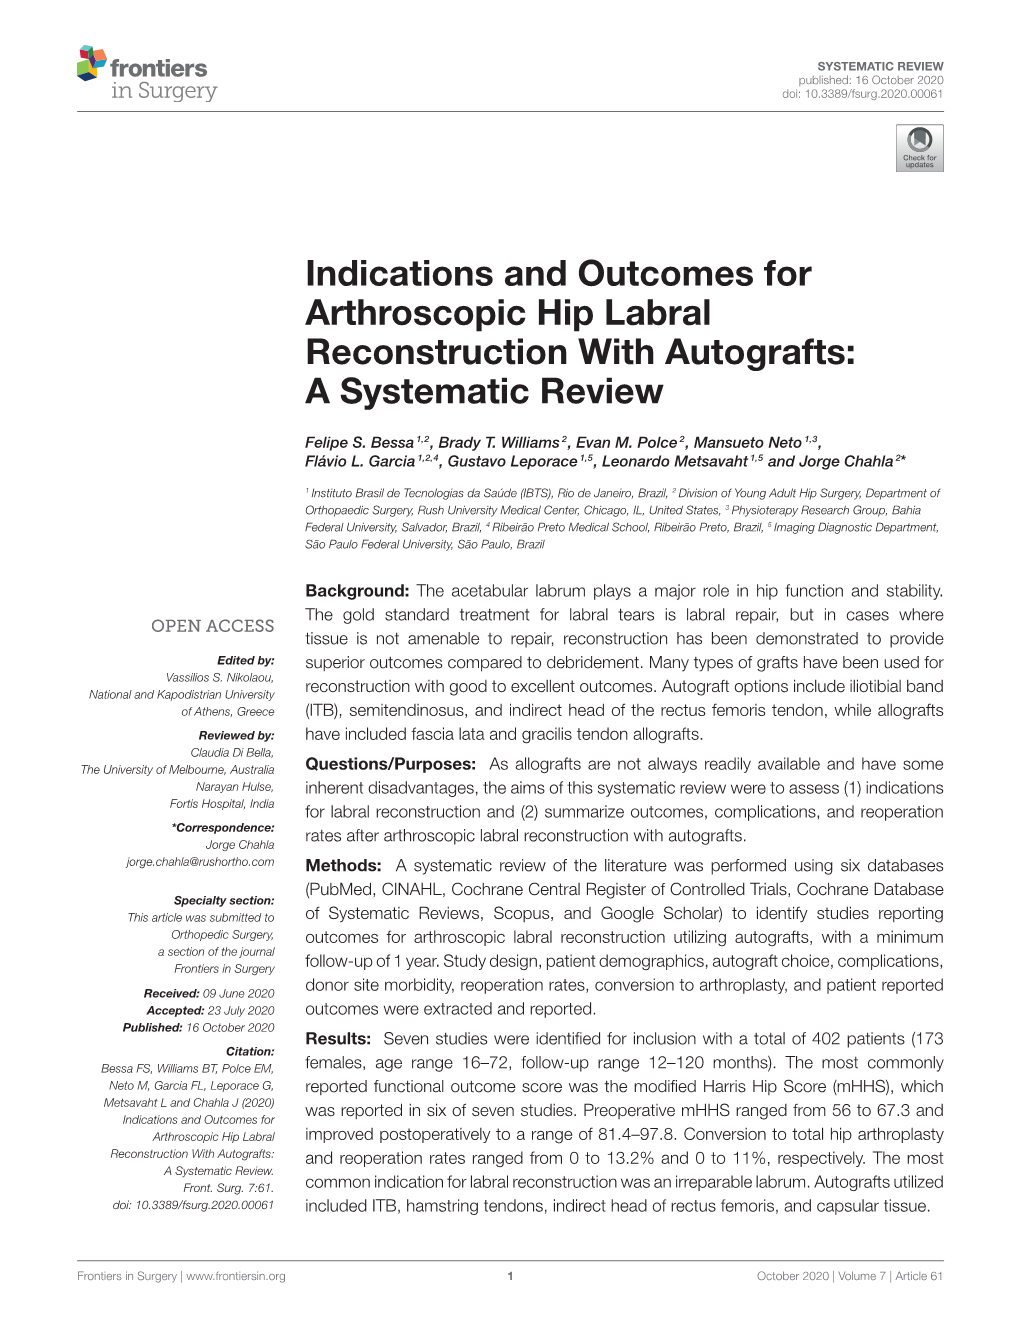 Indications and Outcomes for Arthroscopic Hip Labral Reconstruction with Autografts: a Systematic Review